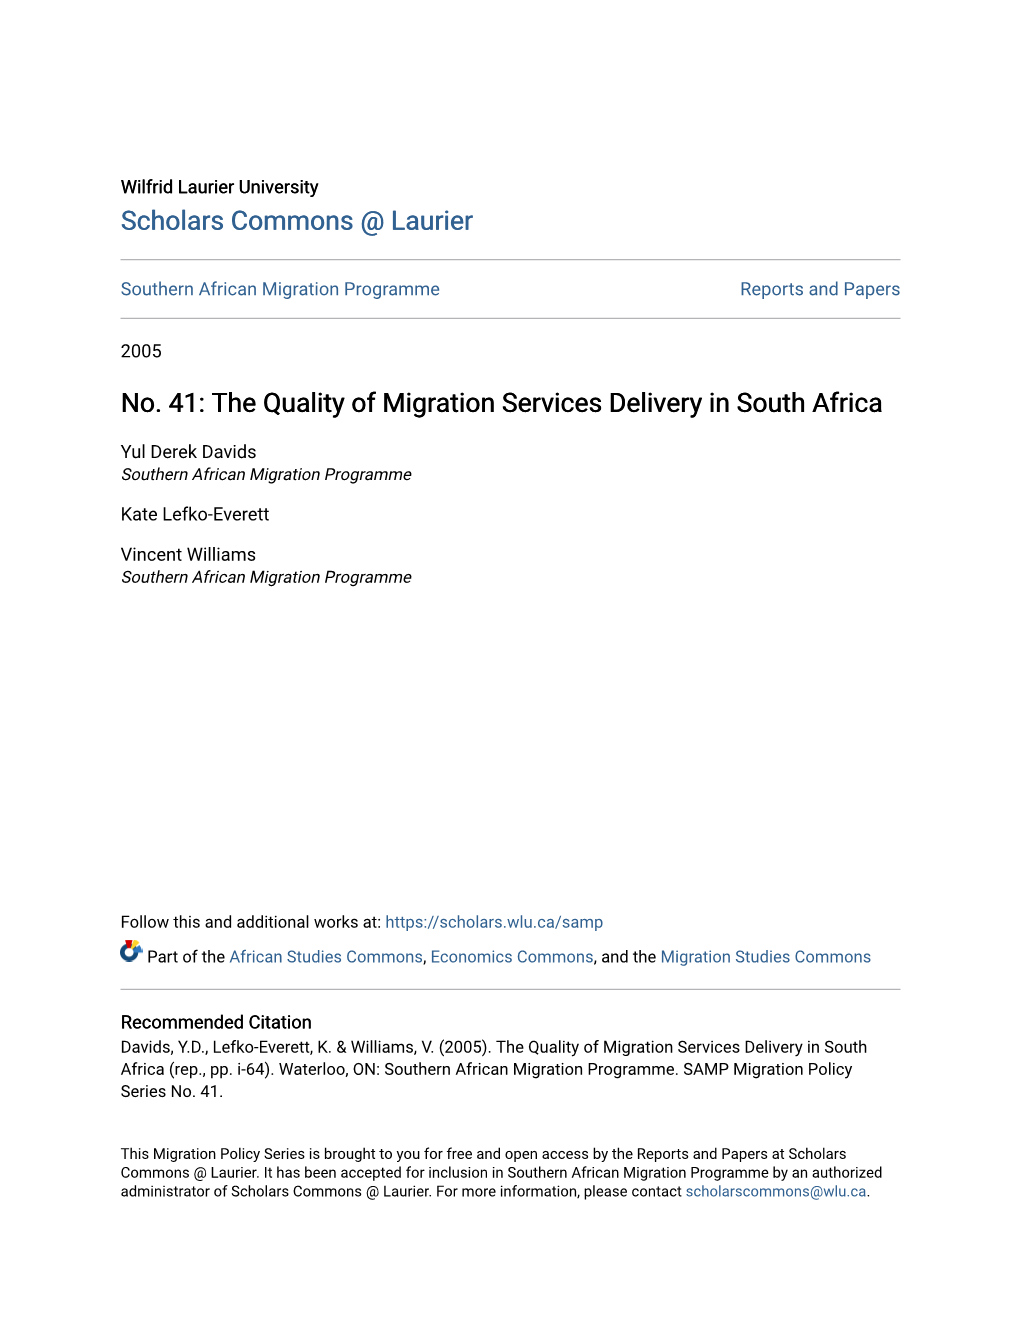 The Quality of Migration Services Delivery in South Africa